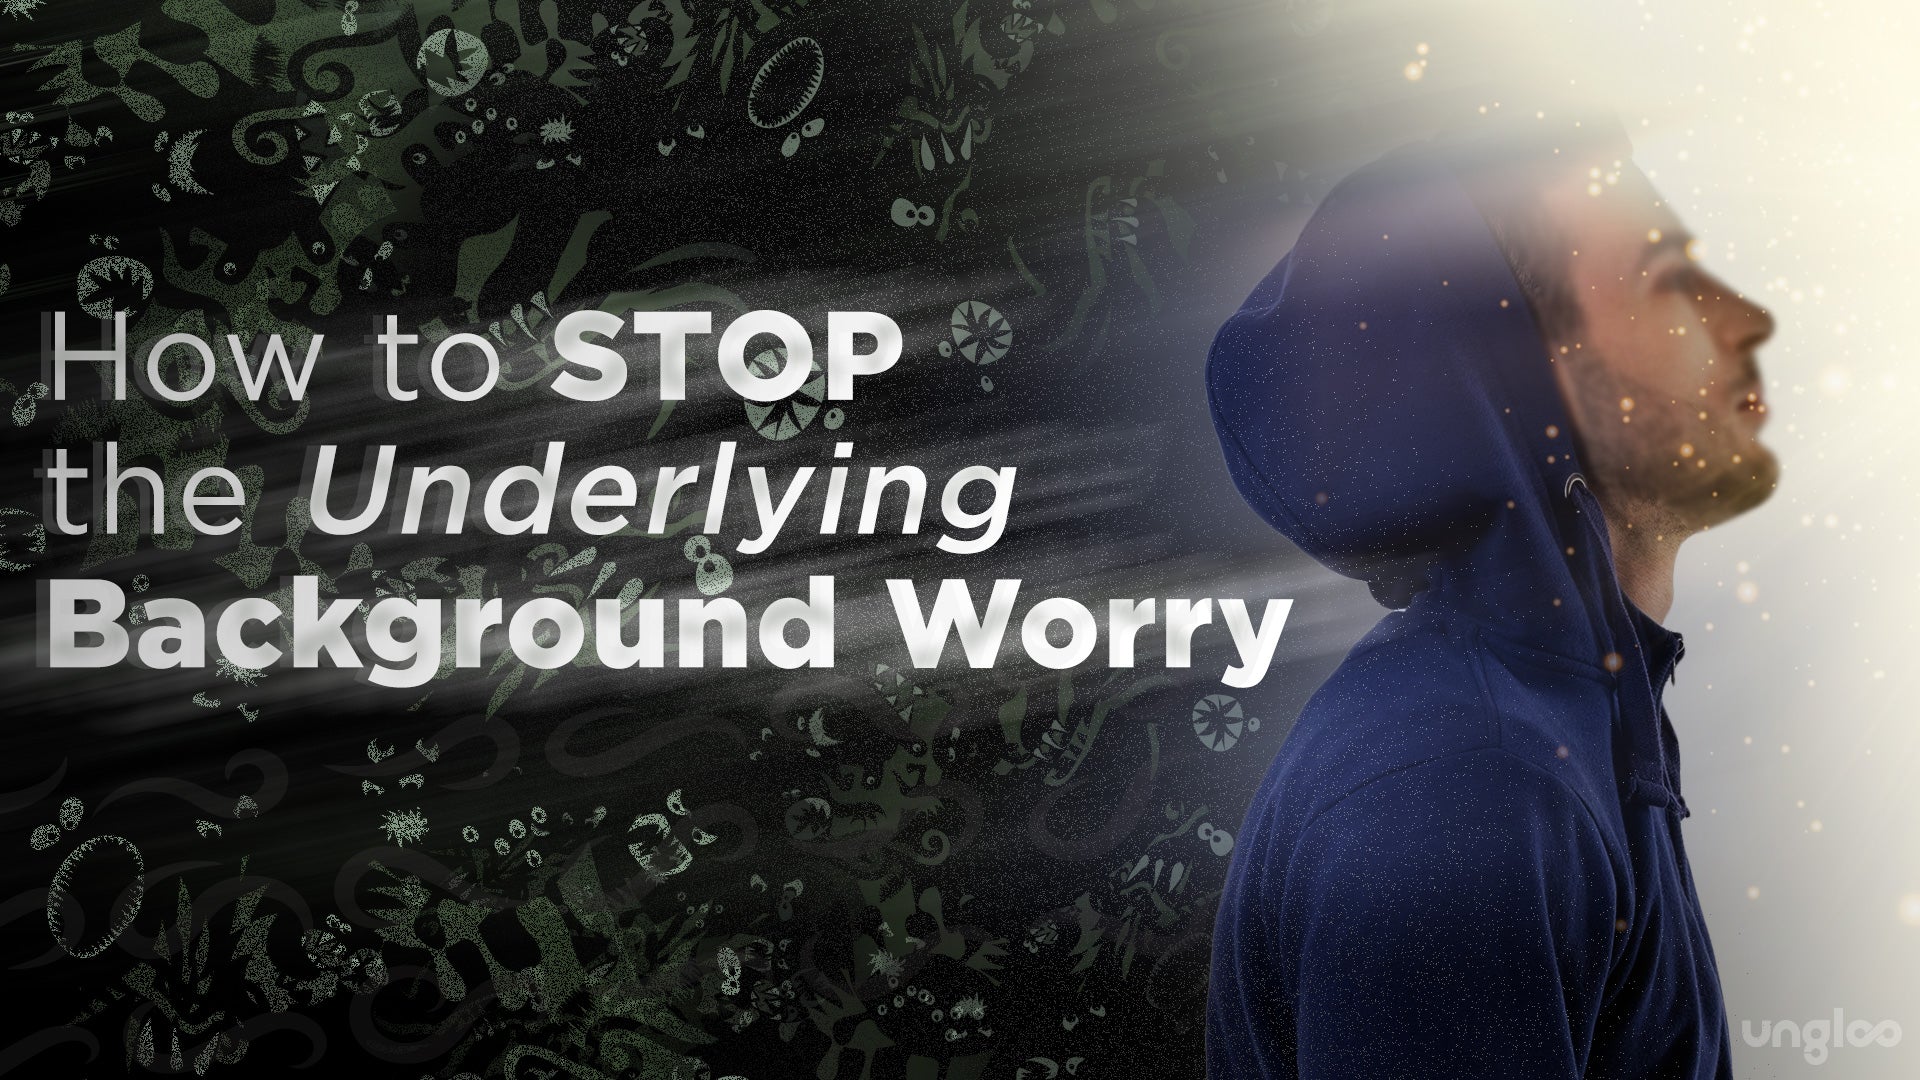 How to Stop the Underlying Background Worry